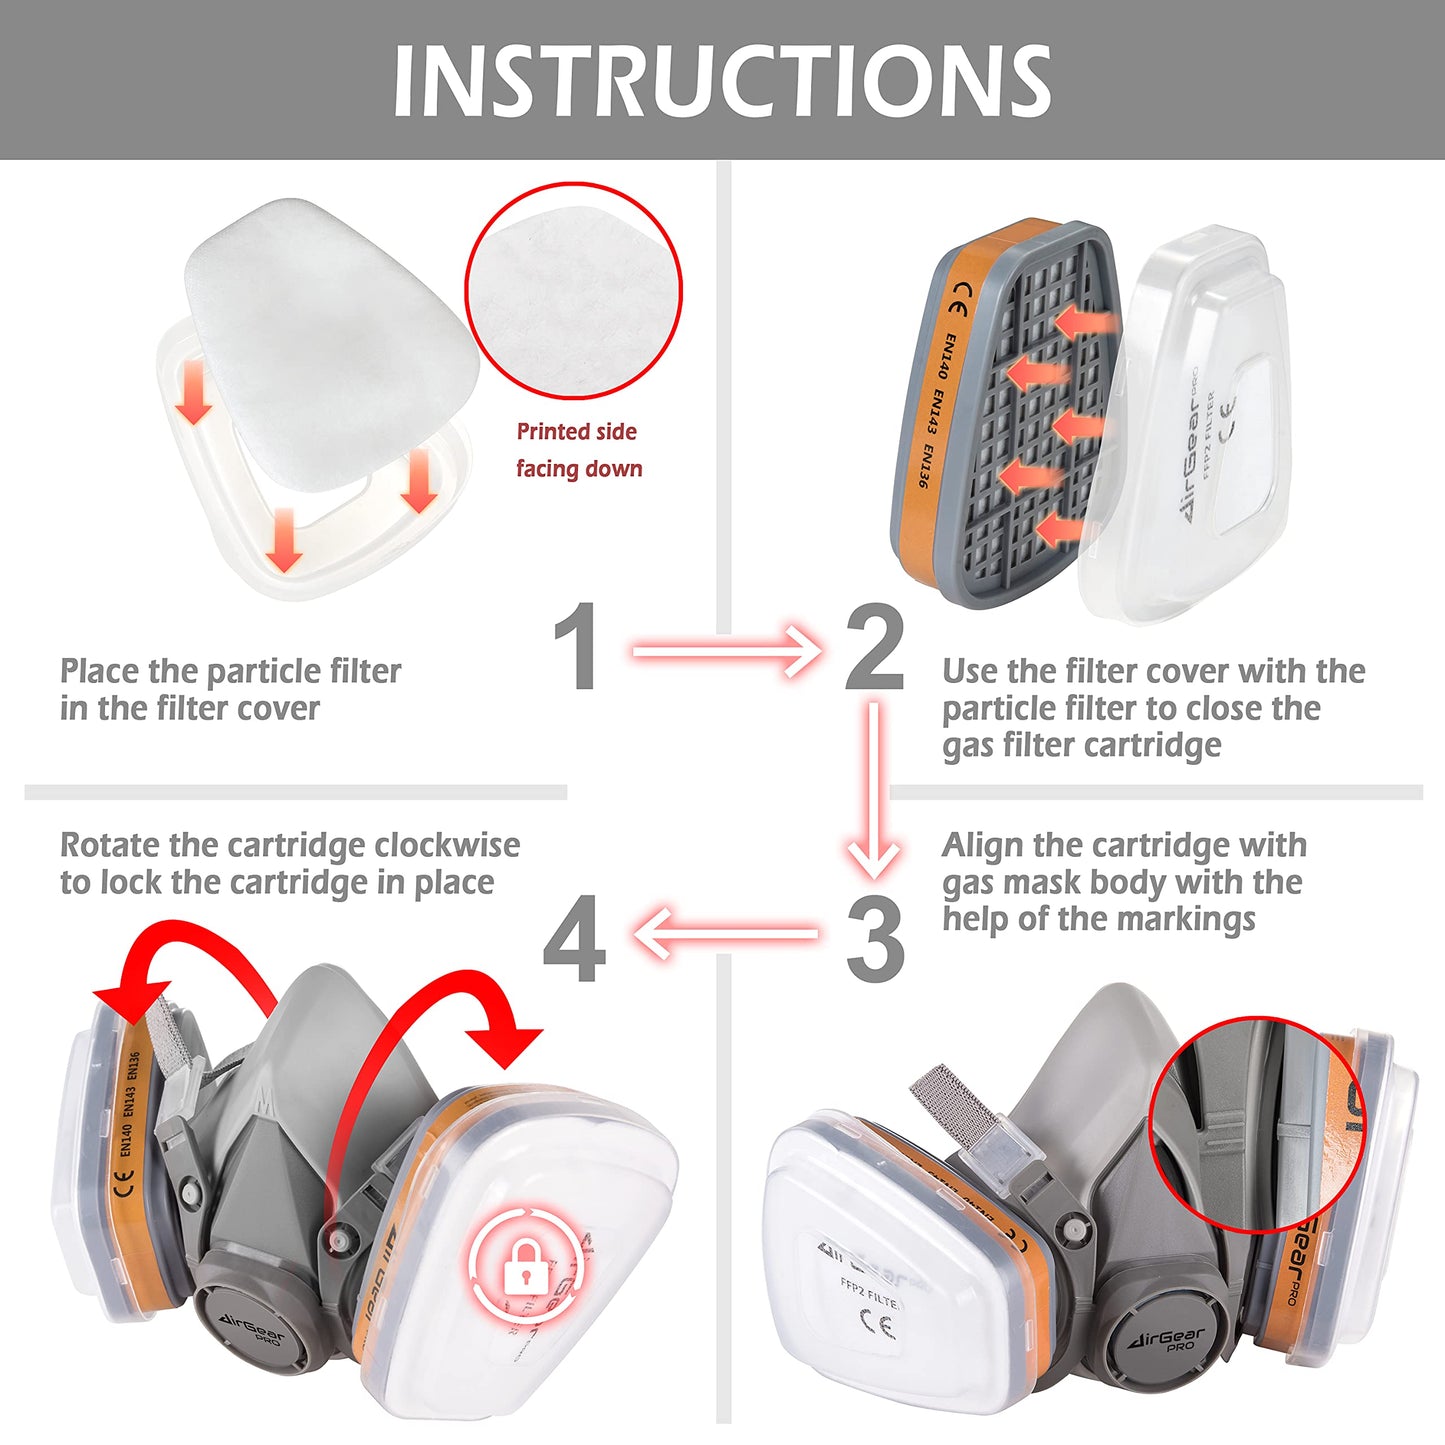 AirGearPro G-500 Reusable Respirator Mask with A1P2 Filters | Anti-Gas, Anti-Dust | Gas Mask Ideal for Painting, Woodworking, Construction, Sanding, Spraying, Chemicals, DIY etc